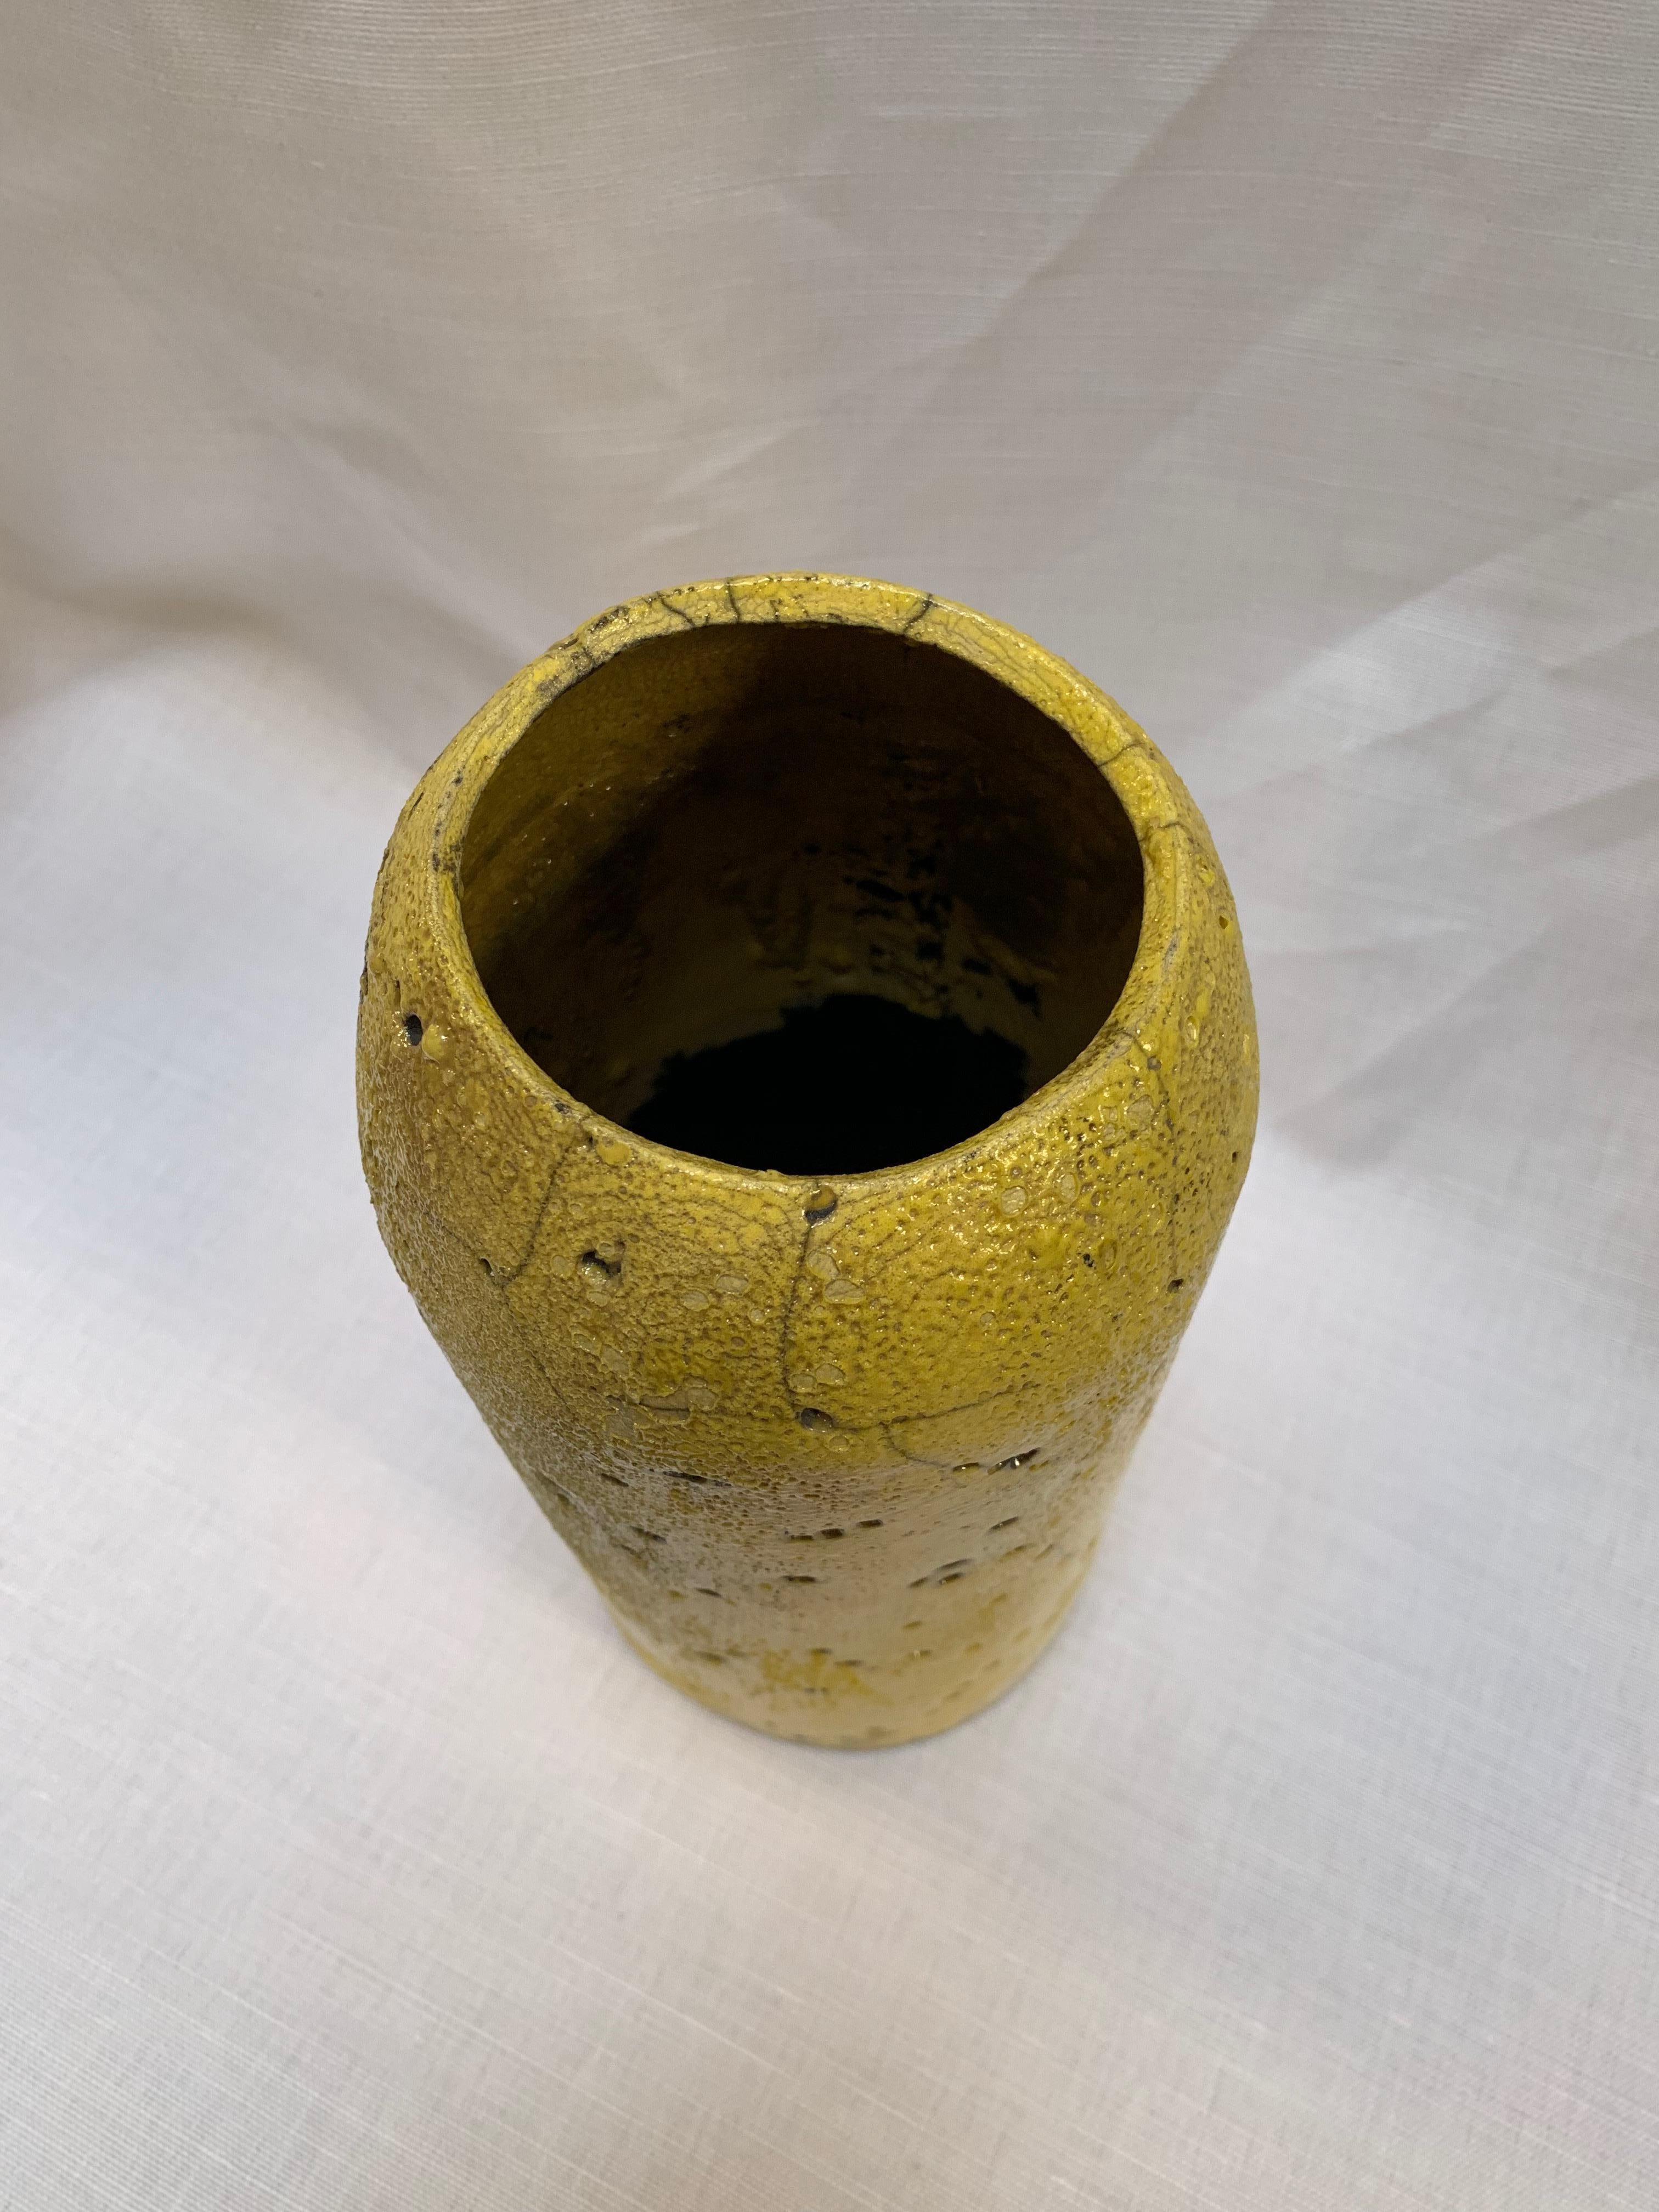 American Tall Yellow Ceramic Textured Cylindrical Vase, Hand-Built Raku Crackle Stoneware For Sale